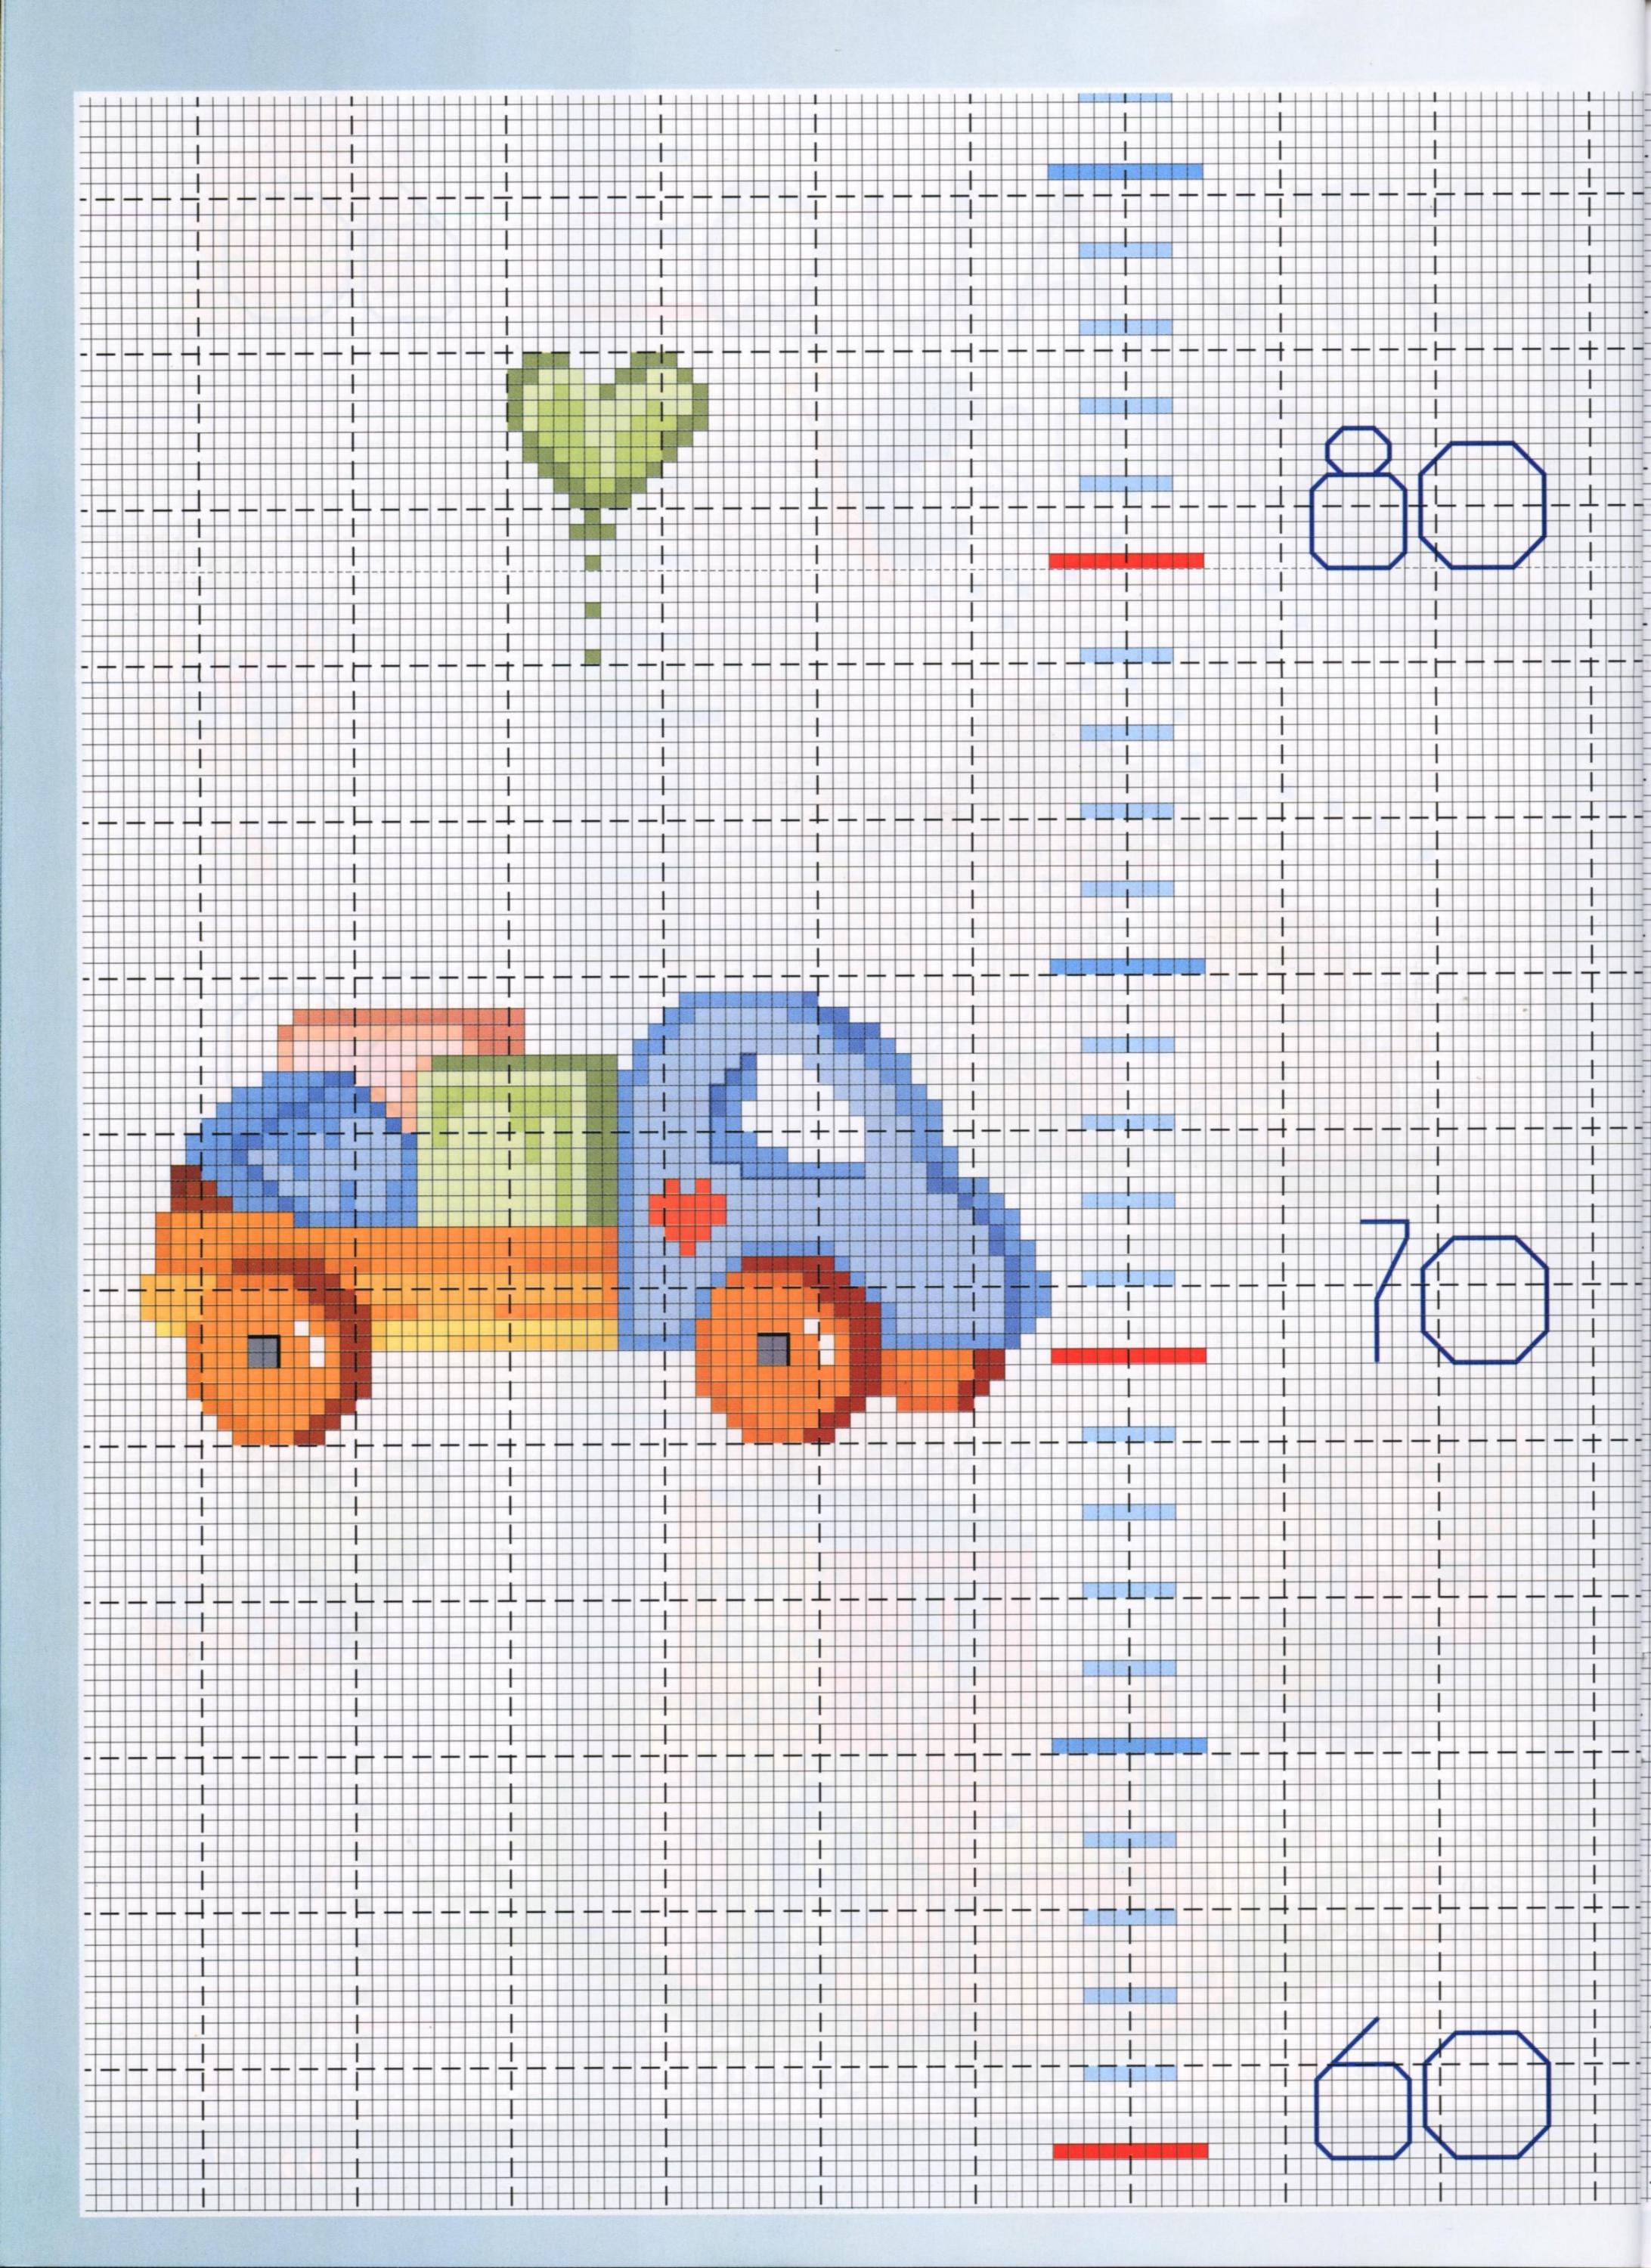 Cross stitch height chart with baby toys (2)